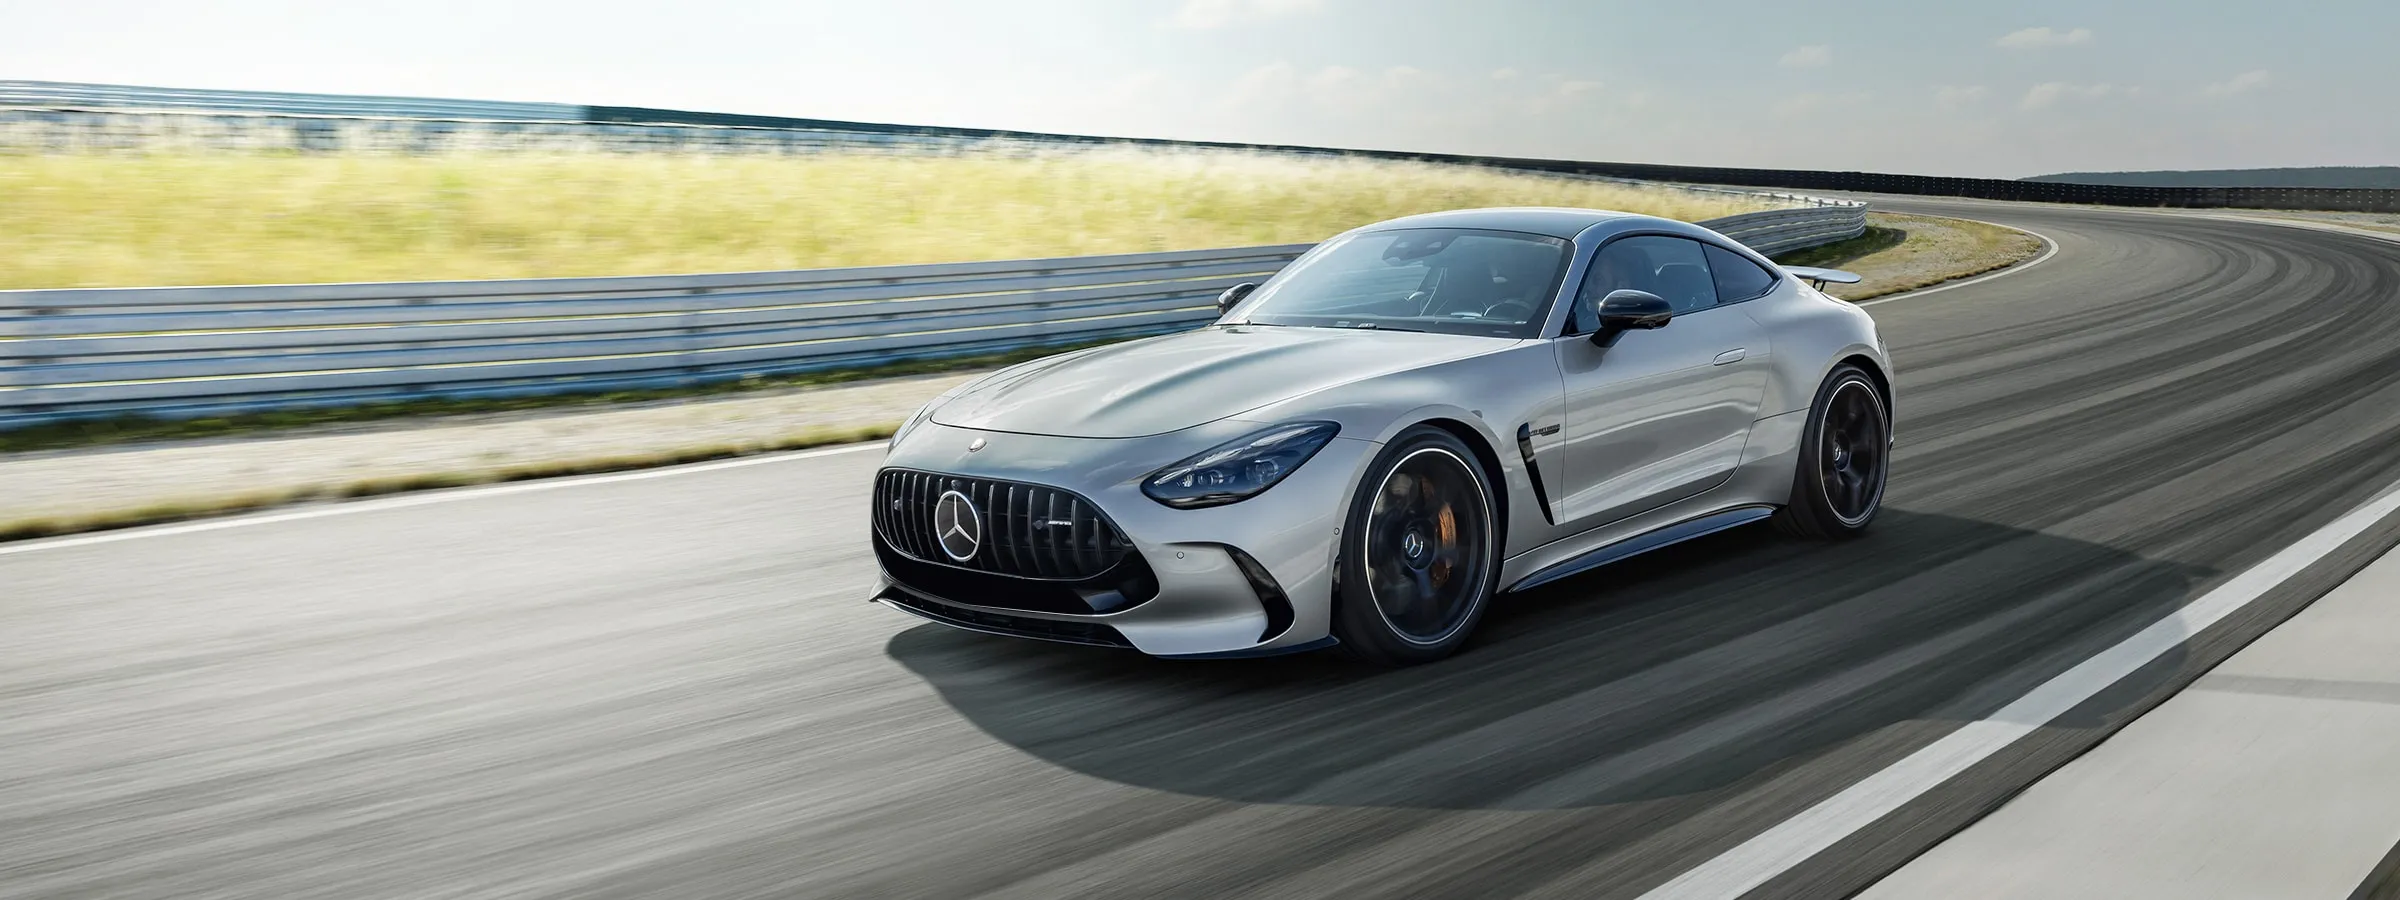 https://www.mbusa.com/content/dam/mb-nafta/us/future-vehicles/my24/amg-gt-coupe/specialty-hero/2024-AMG-GT-COUPE-CH-DR.jpg